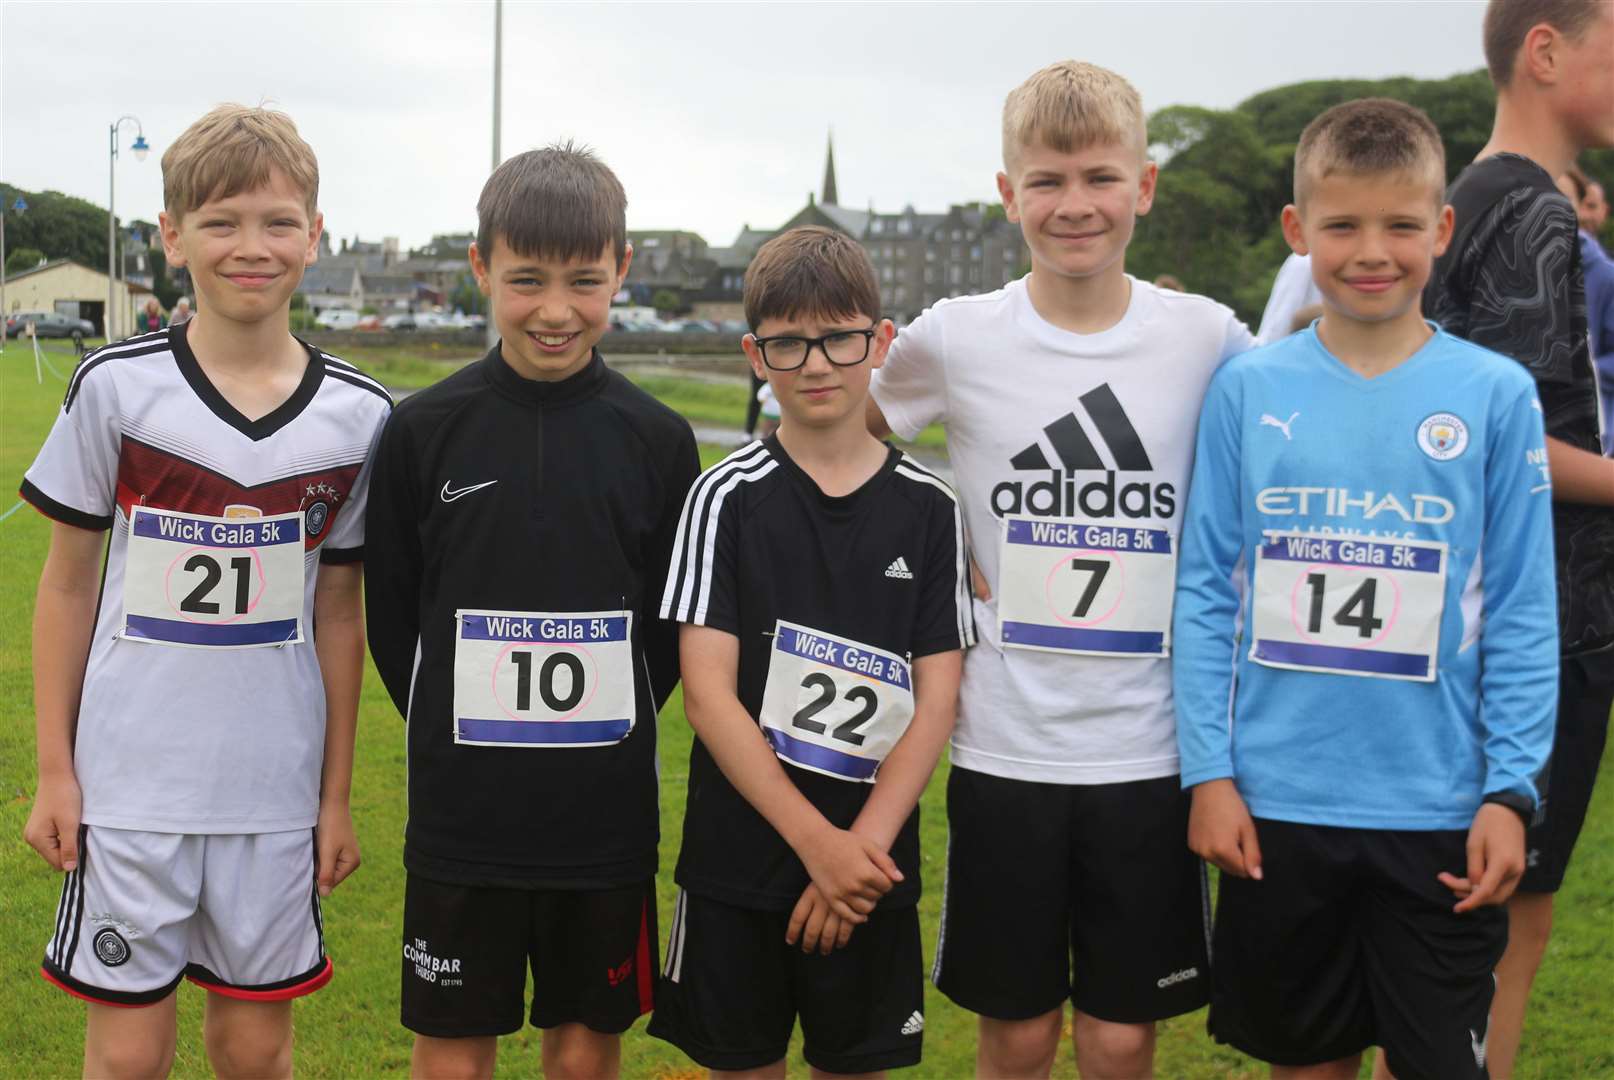 From left: Toby Sutherland, Harry McNeill, Kenzie Clelland, Jamie Malcolm and Alex Traill, all members of the Wick schools' running squad, who took part in the 5k event. Picture: Eswyl Fell